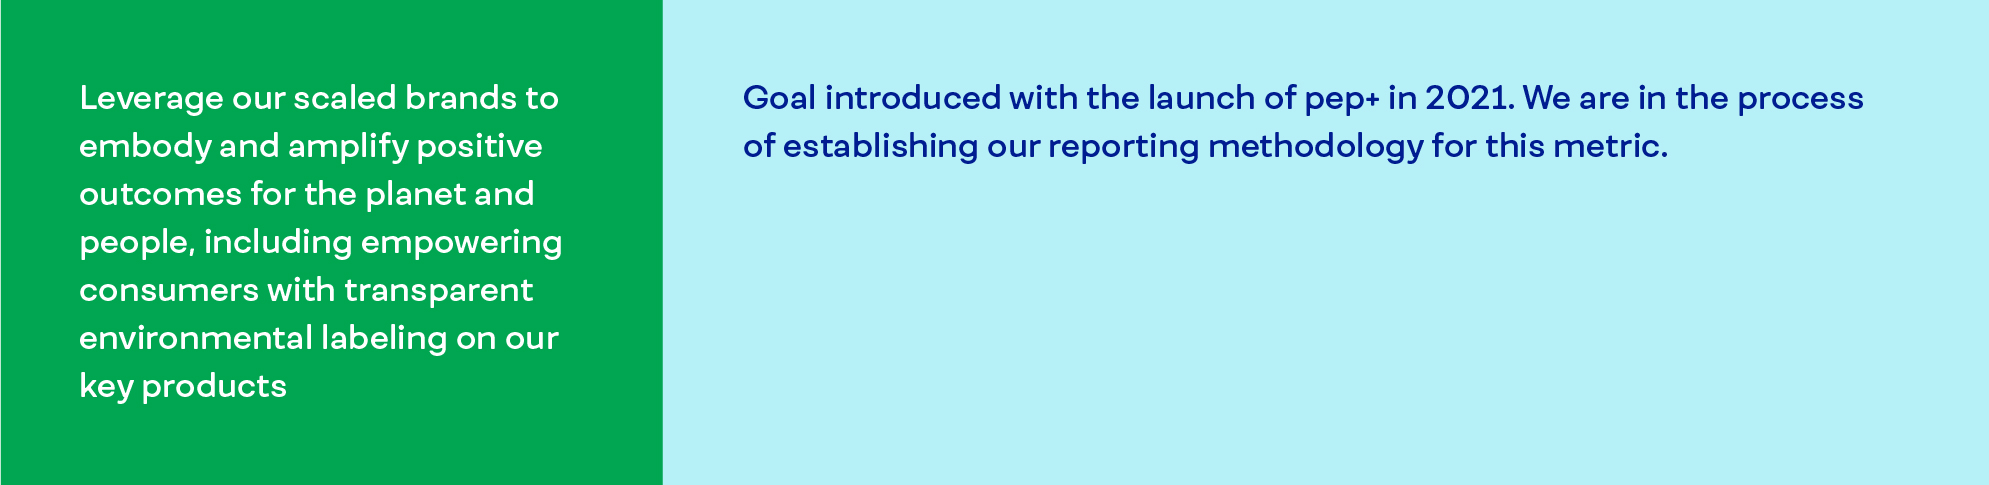 Goal introduced with the launch of pep+ in 2021. Progress reporting for this metric is in process.